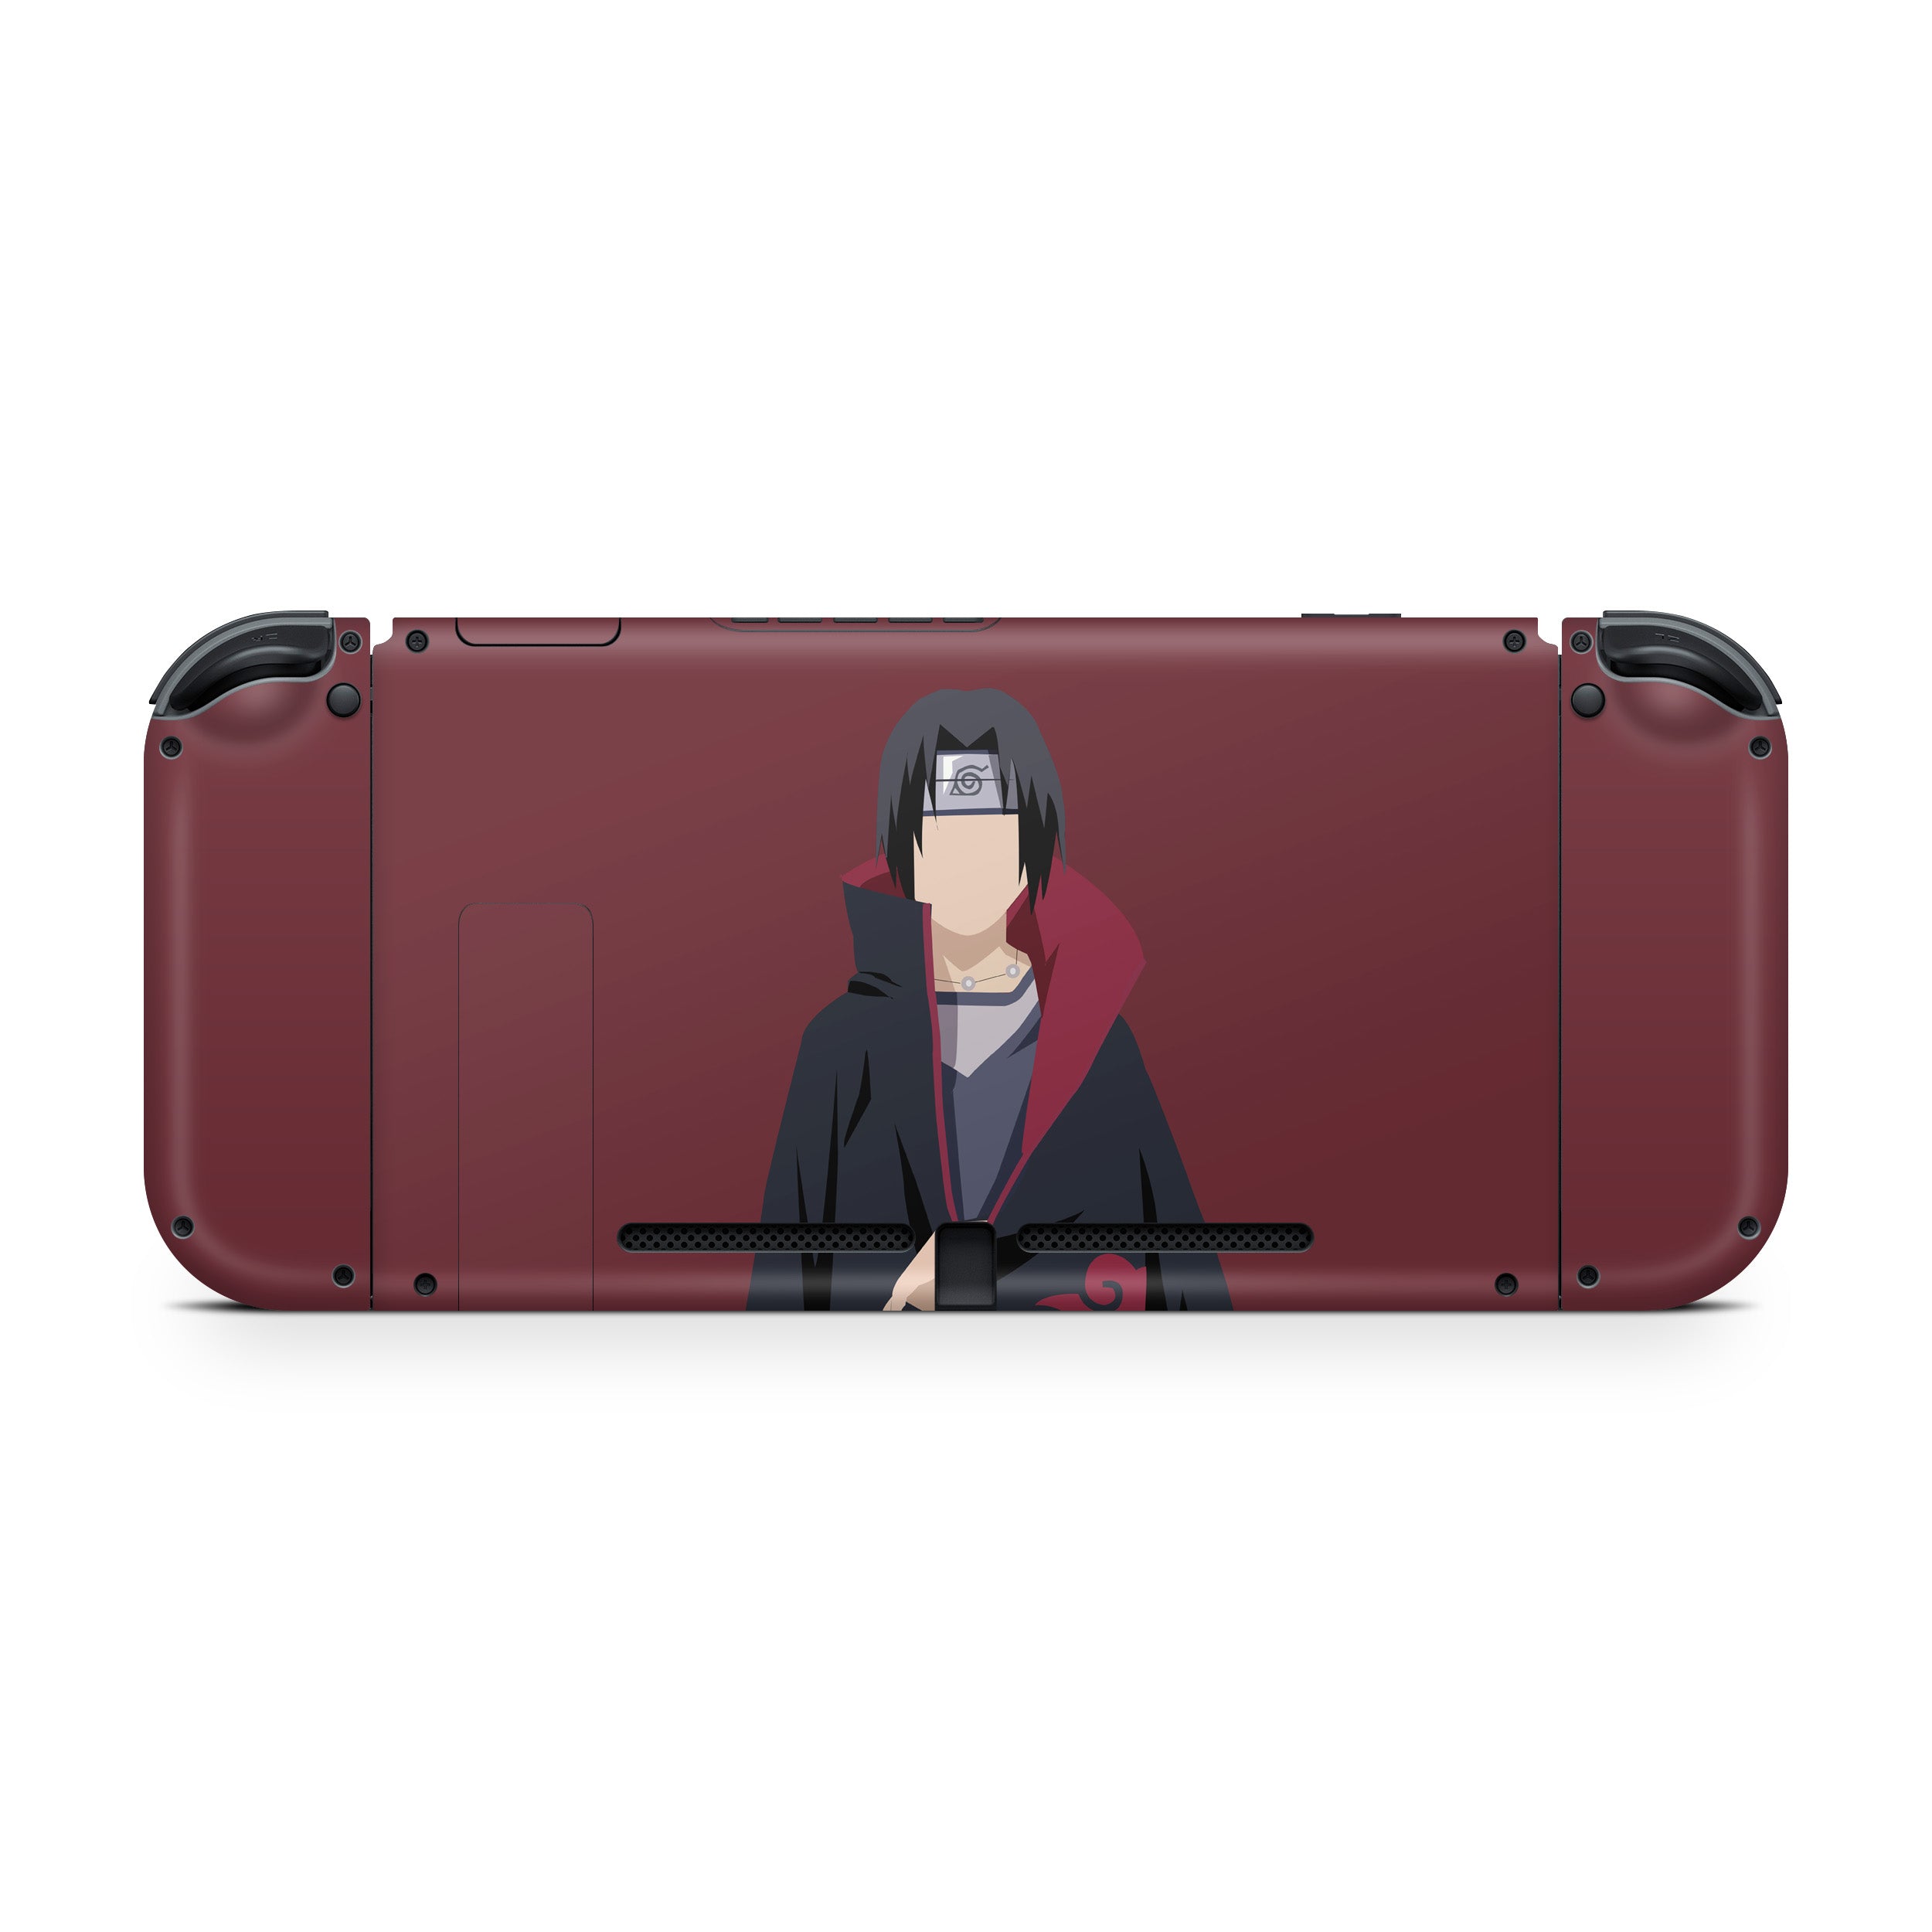 A video game skin featuring a Naruto Itachi design for the Nintendo Switch.